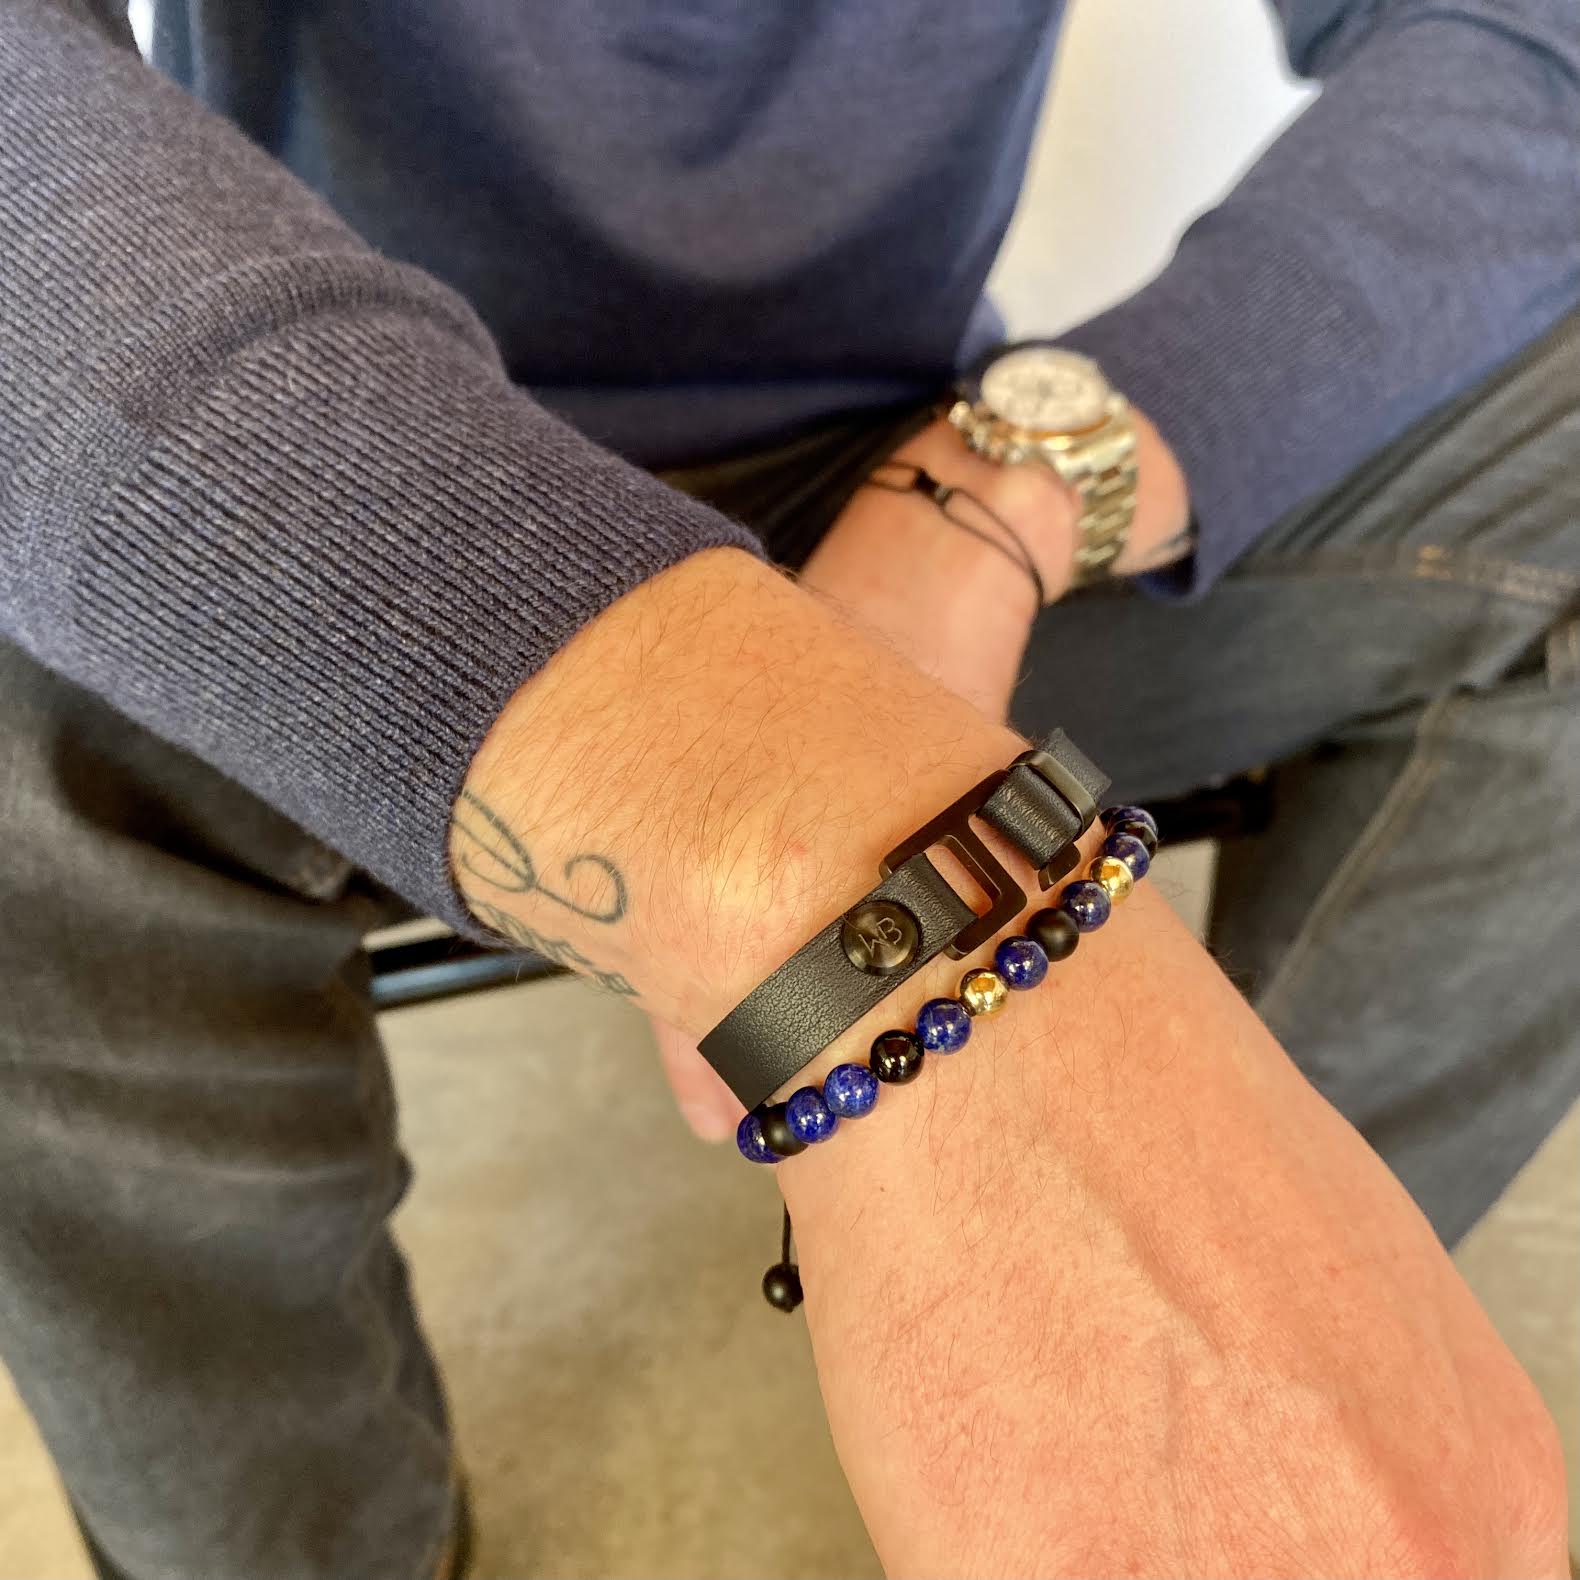 With a trendy, cool modern vibe, this navy/sky blue French leather cuff bracelet is paired with your choice of brushed stainless steel, brass or black ceramic hardware. Our signature cuff bracelet is a modern staple for your WristBend collection. Made by WristBend